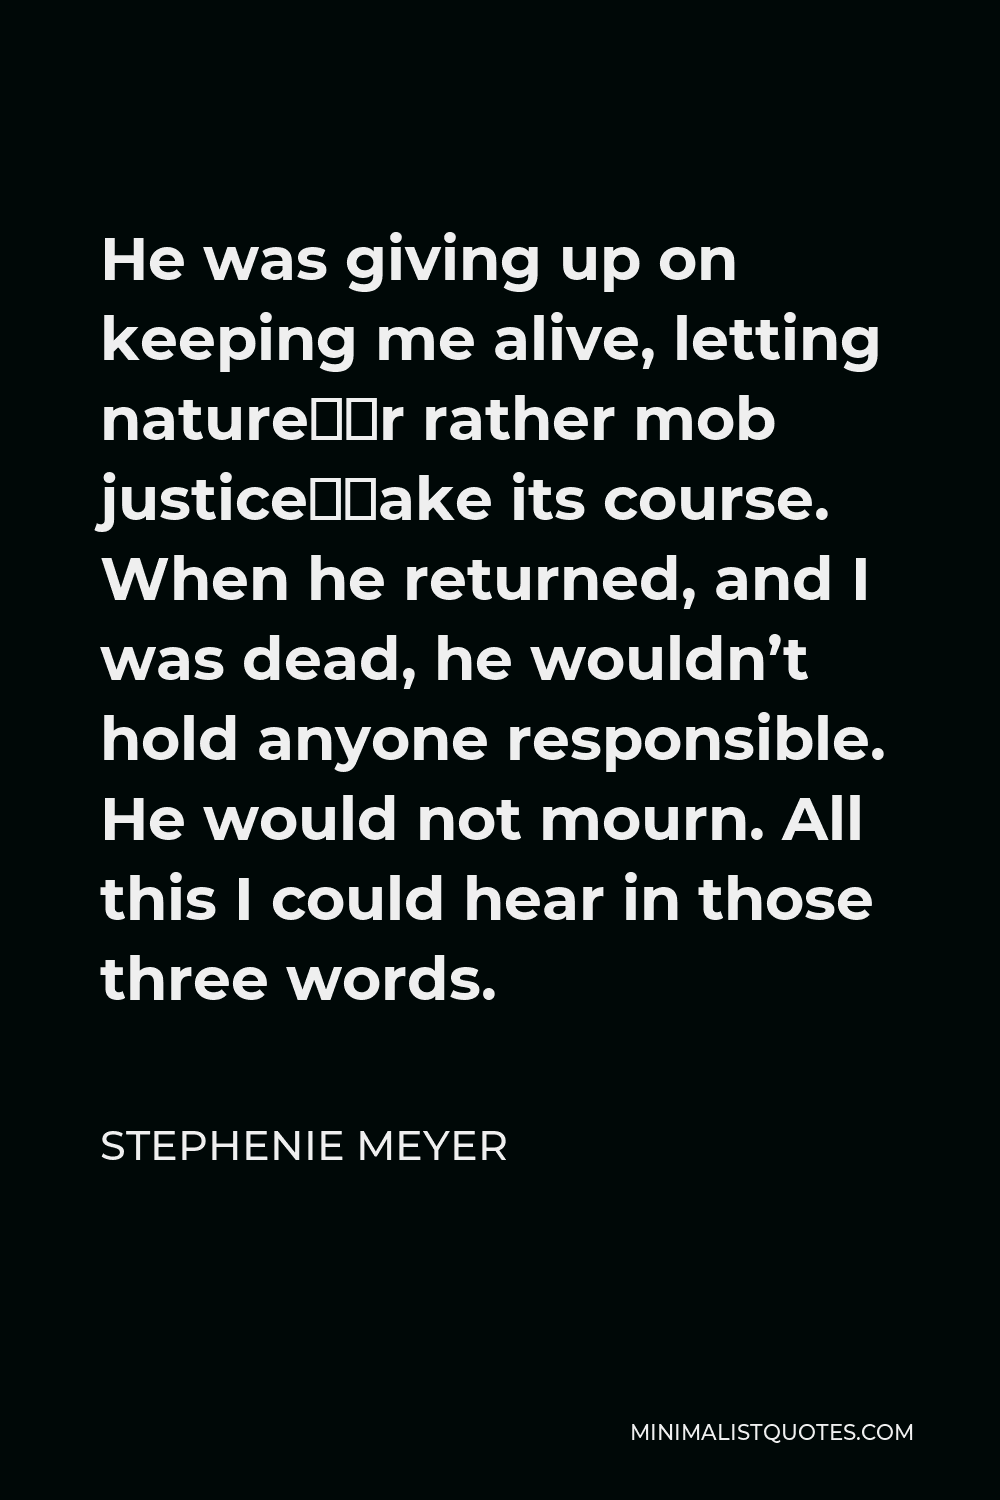 Stephenie Meyer Quote - He was giving up on keeping me alive, letting nature–or rather mob justice–take its course. When he returned, and I was dead, he wouldn’t hold anyone responsible. He would not mourn. All this I could hear in those three words.